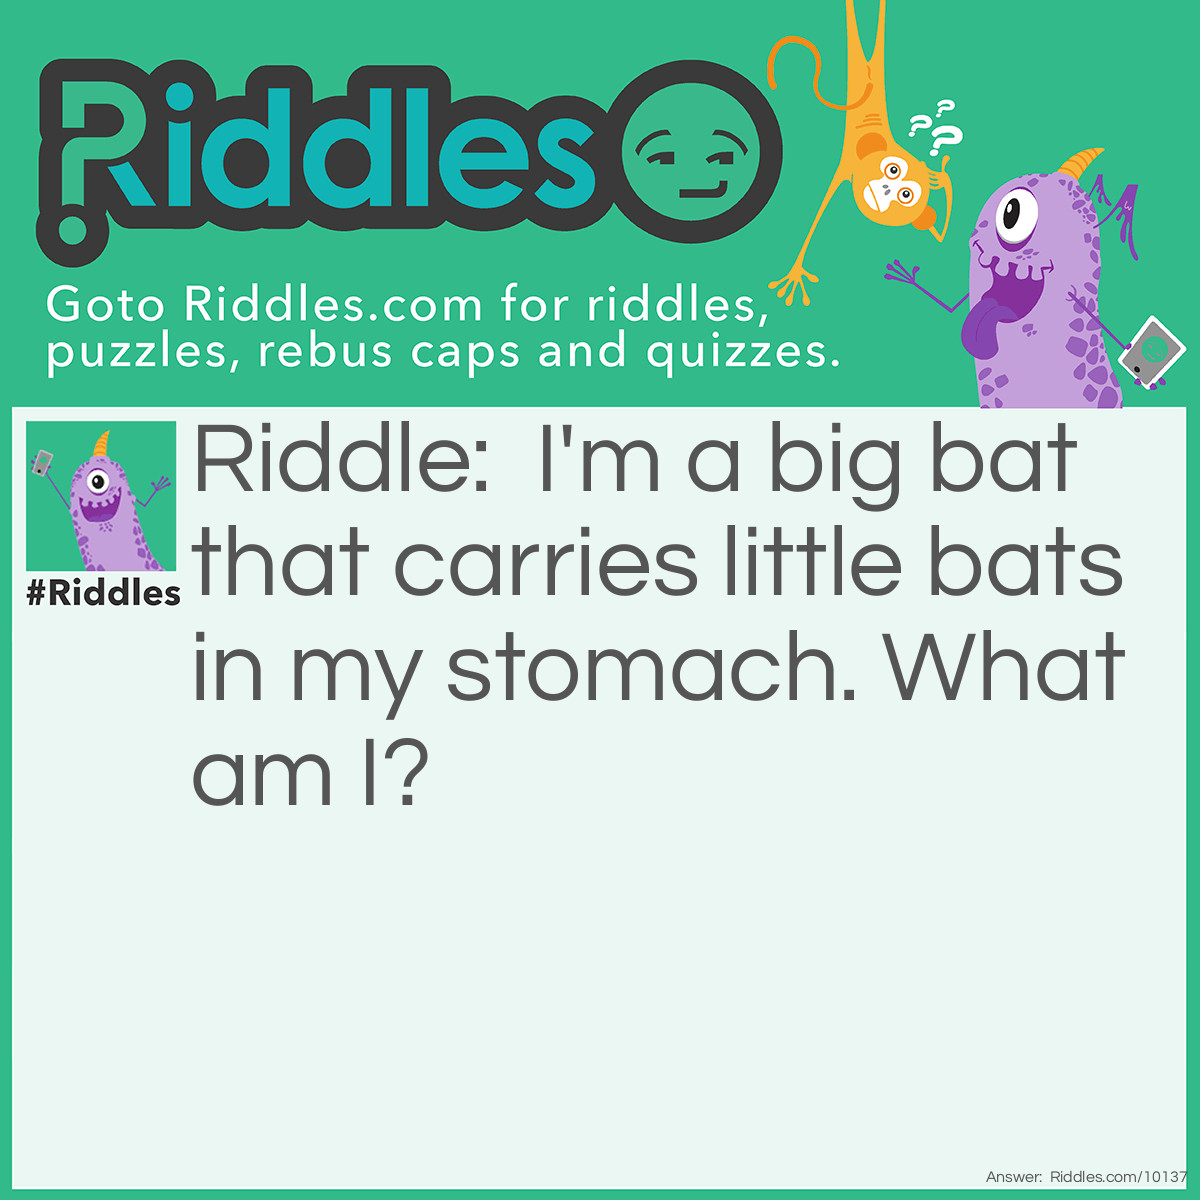 Riddle: I'm a big bat that carries little bats in my stomach. What am I? Answer: An aeroplane.